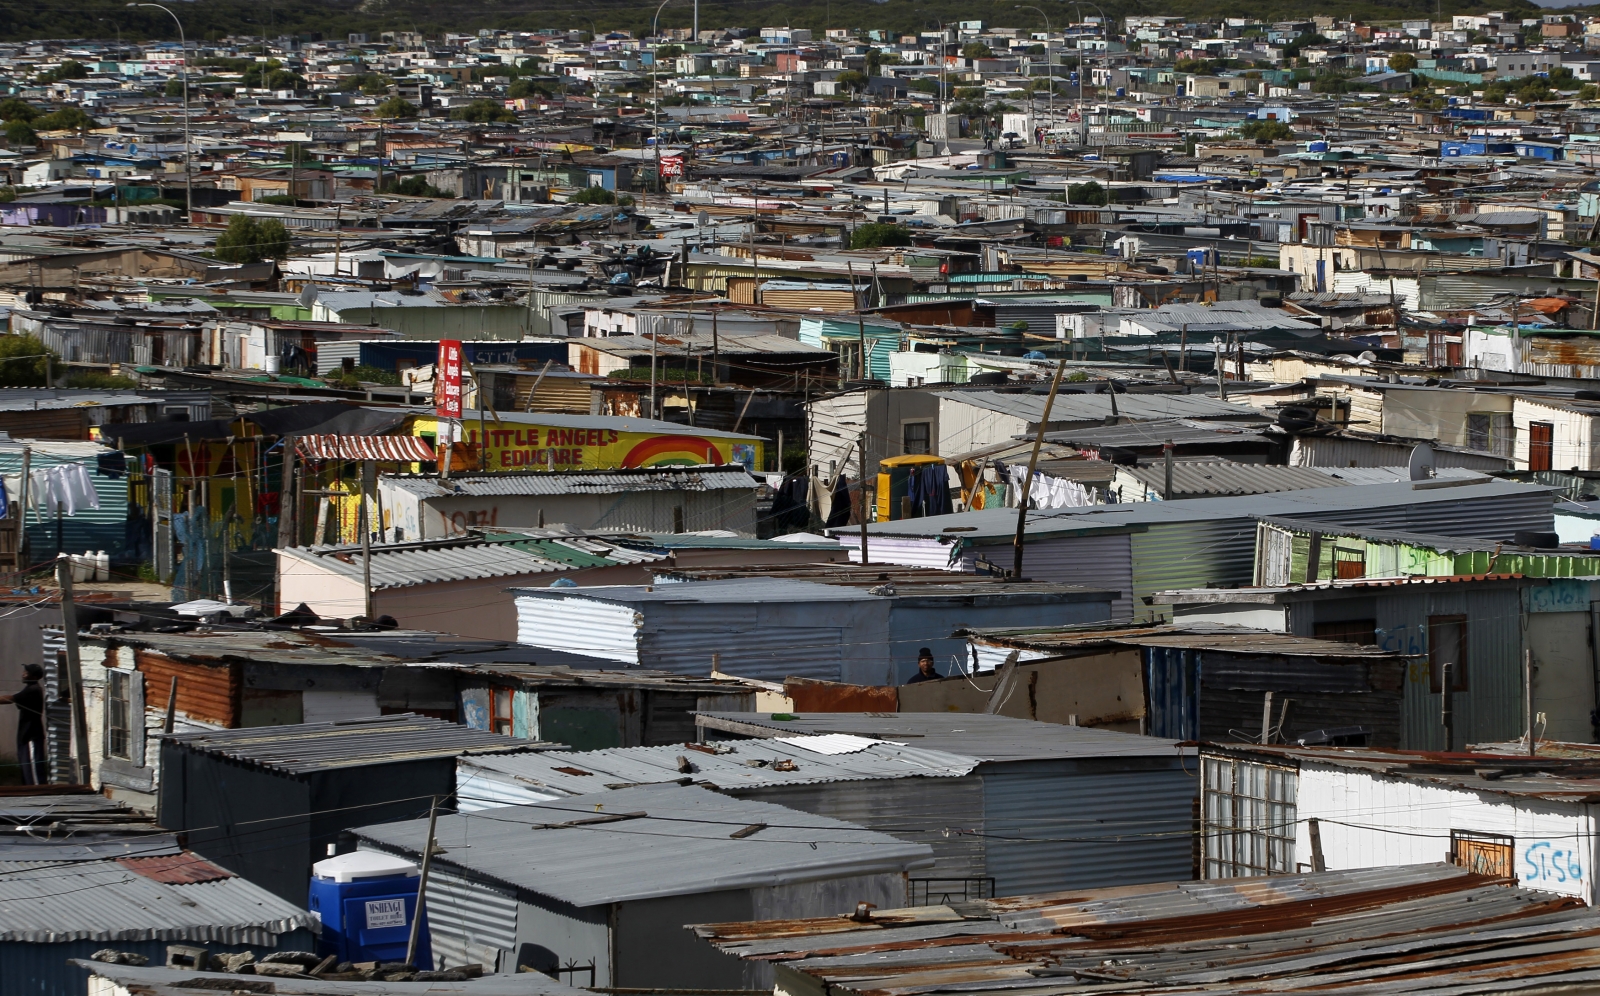 Cape Town: Most Violent City in Africa Struggles with Entrenched Gang